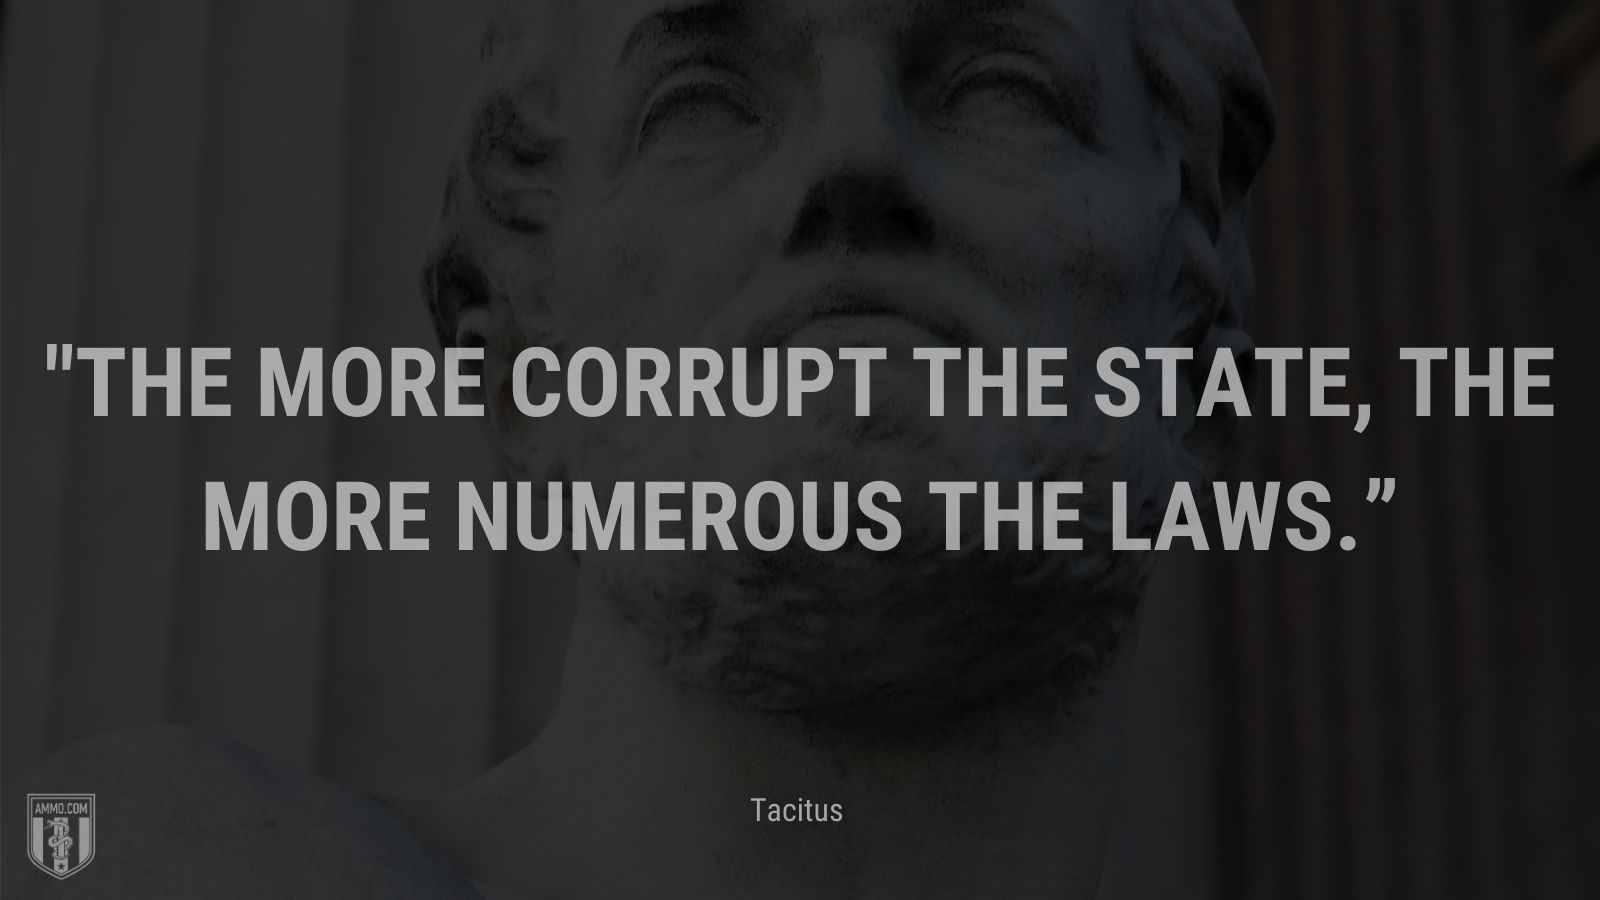 “The more corrupt the state, the more numerous the laws.” - Tacitus